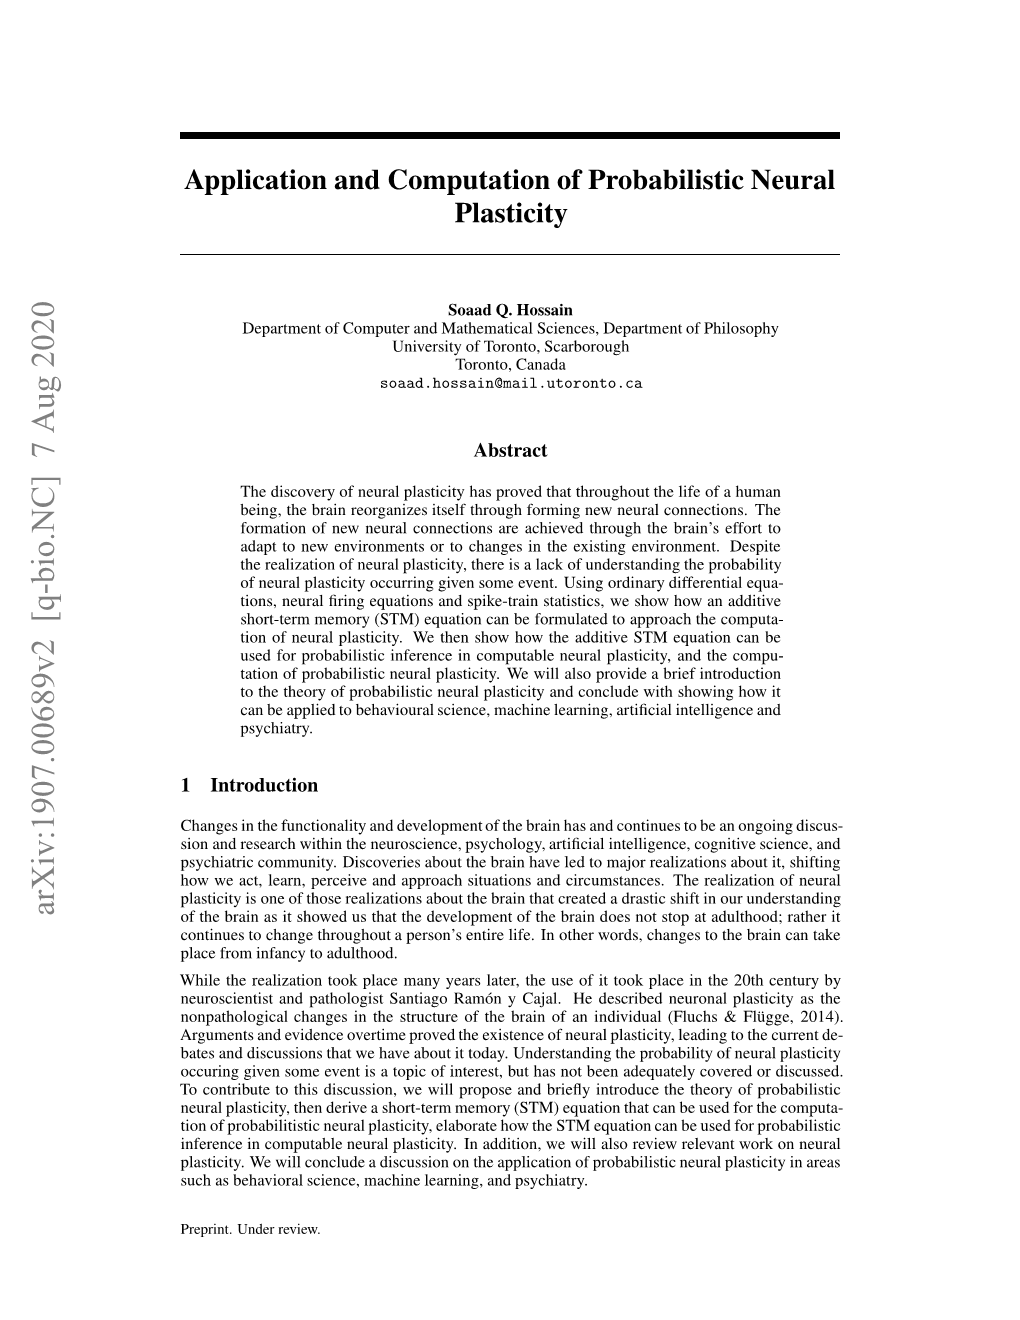 Application and Computation of Probabilistic Neural Plasticity